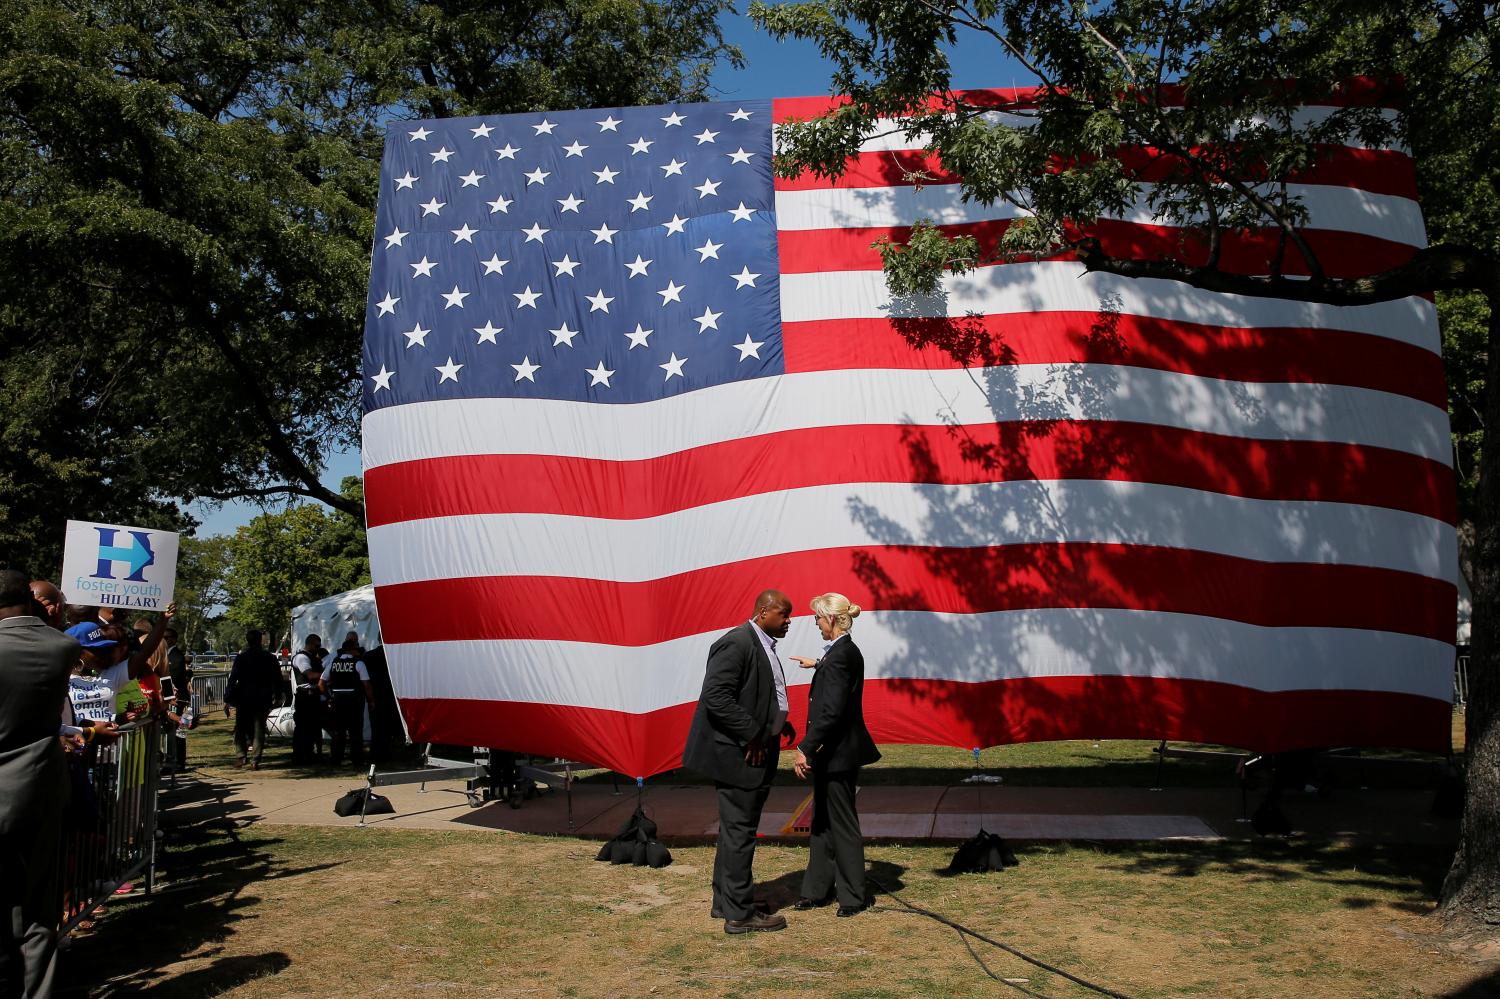 Two secret service agents, a man and a woman, talk in front of a large American flag.